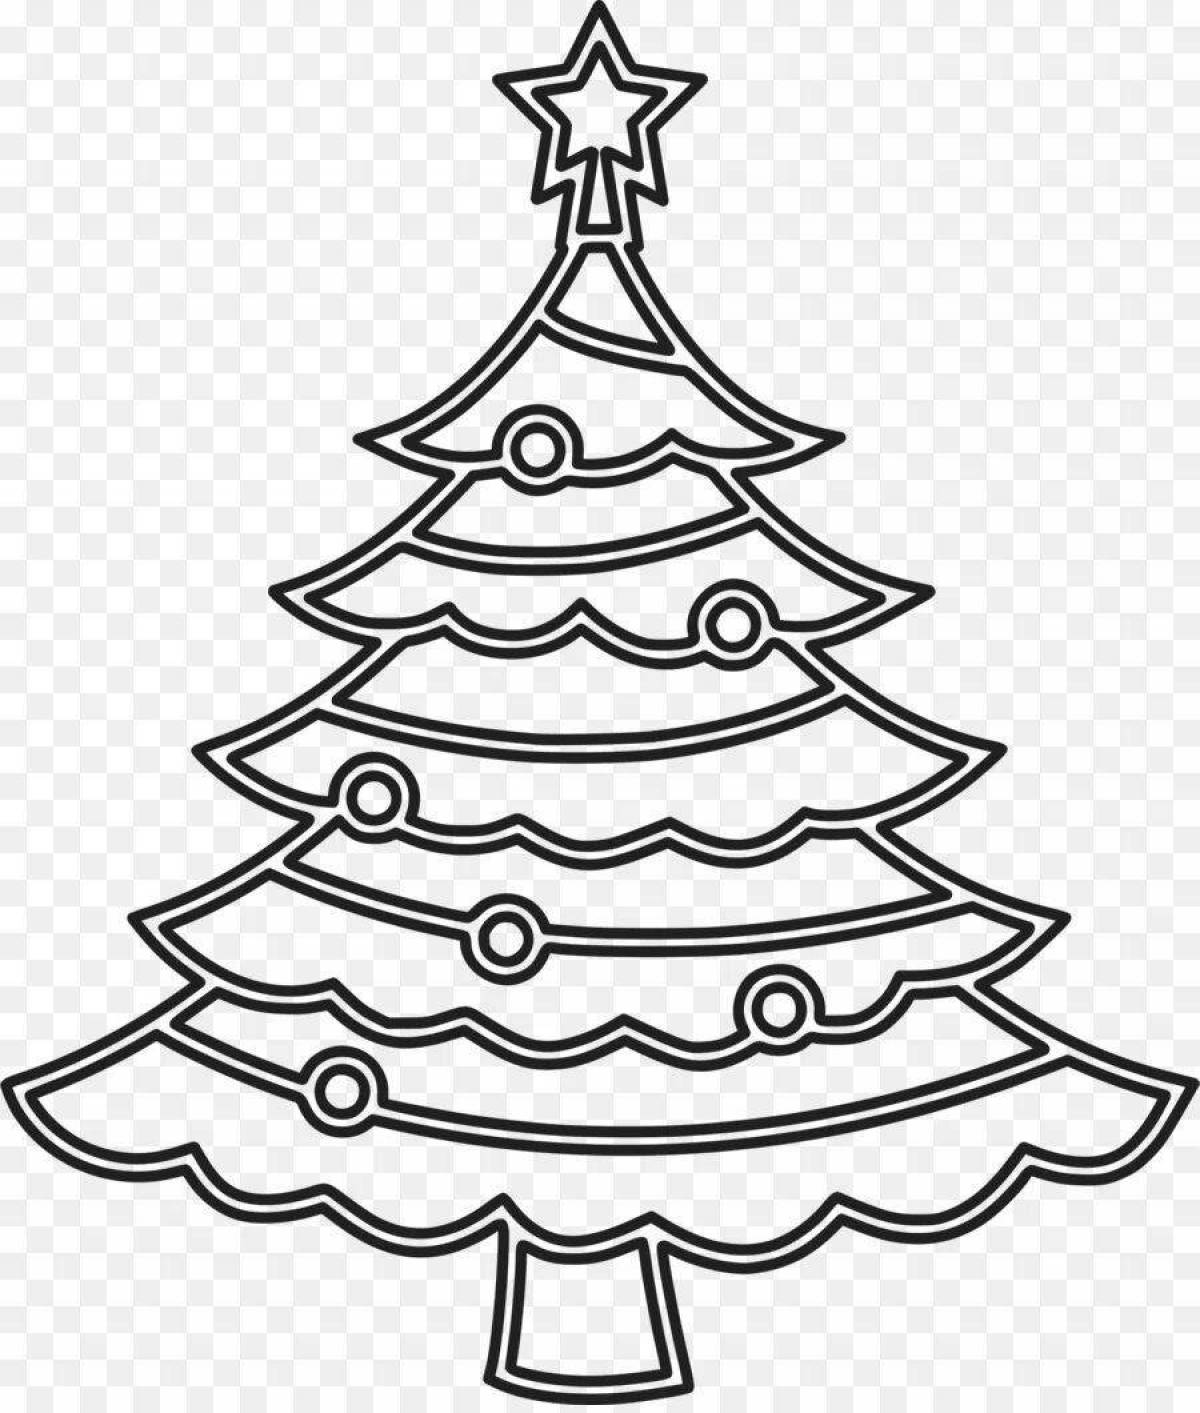 Grand coloring page christmas tree outline